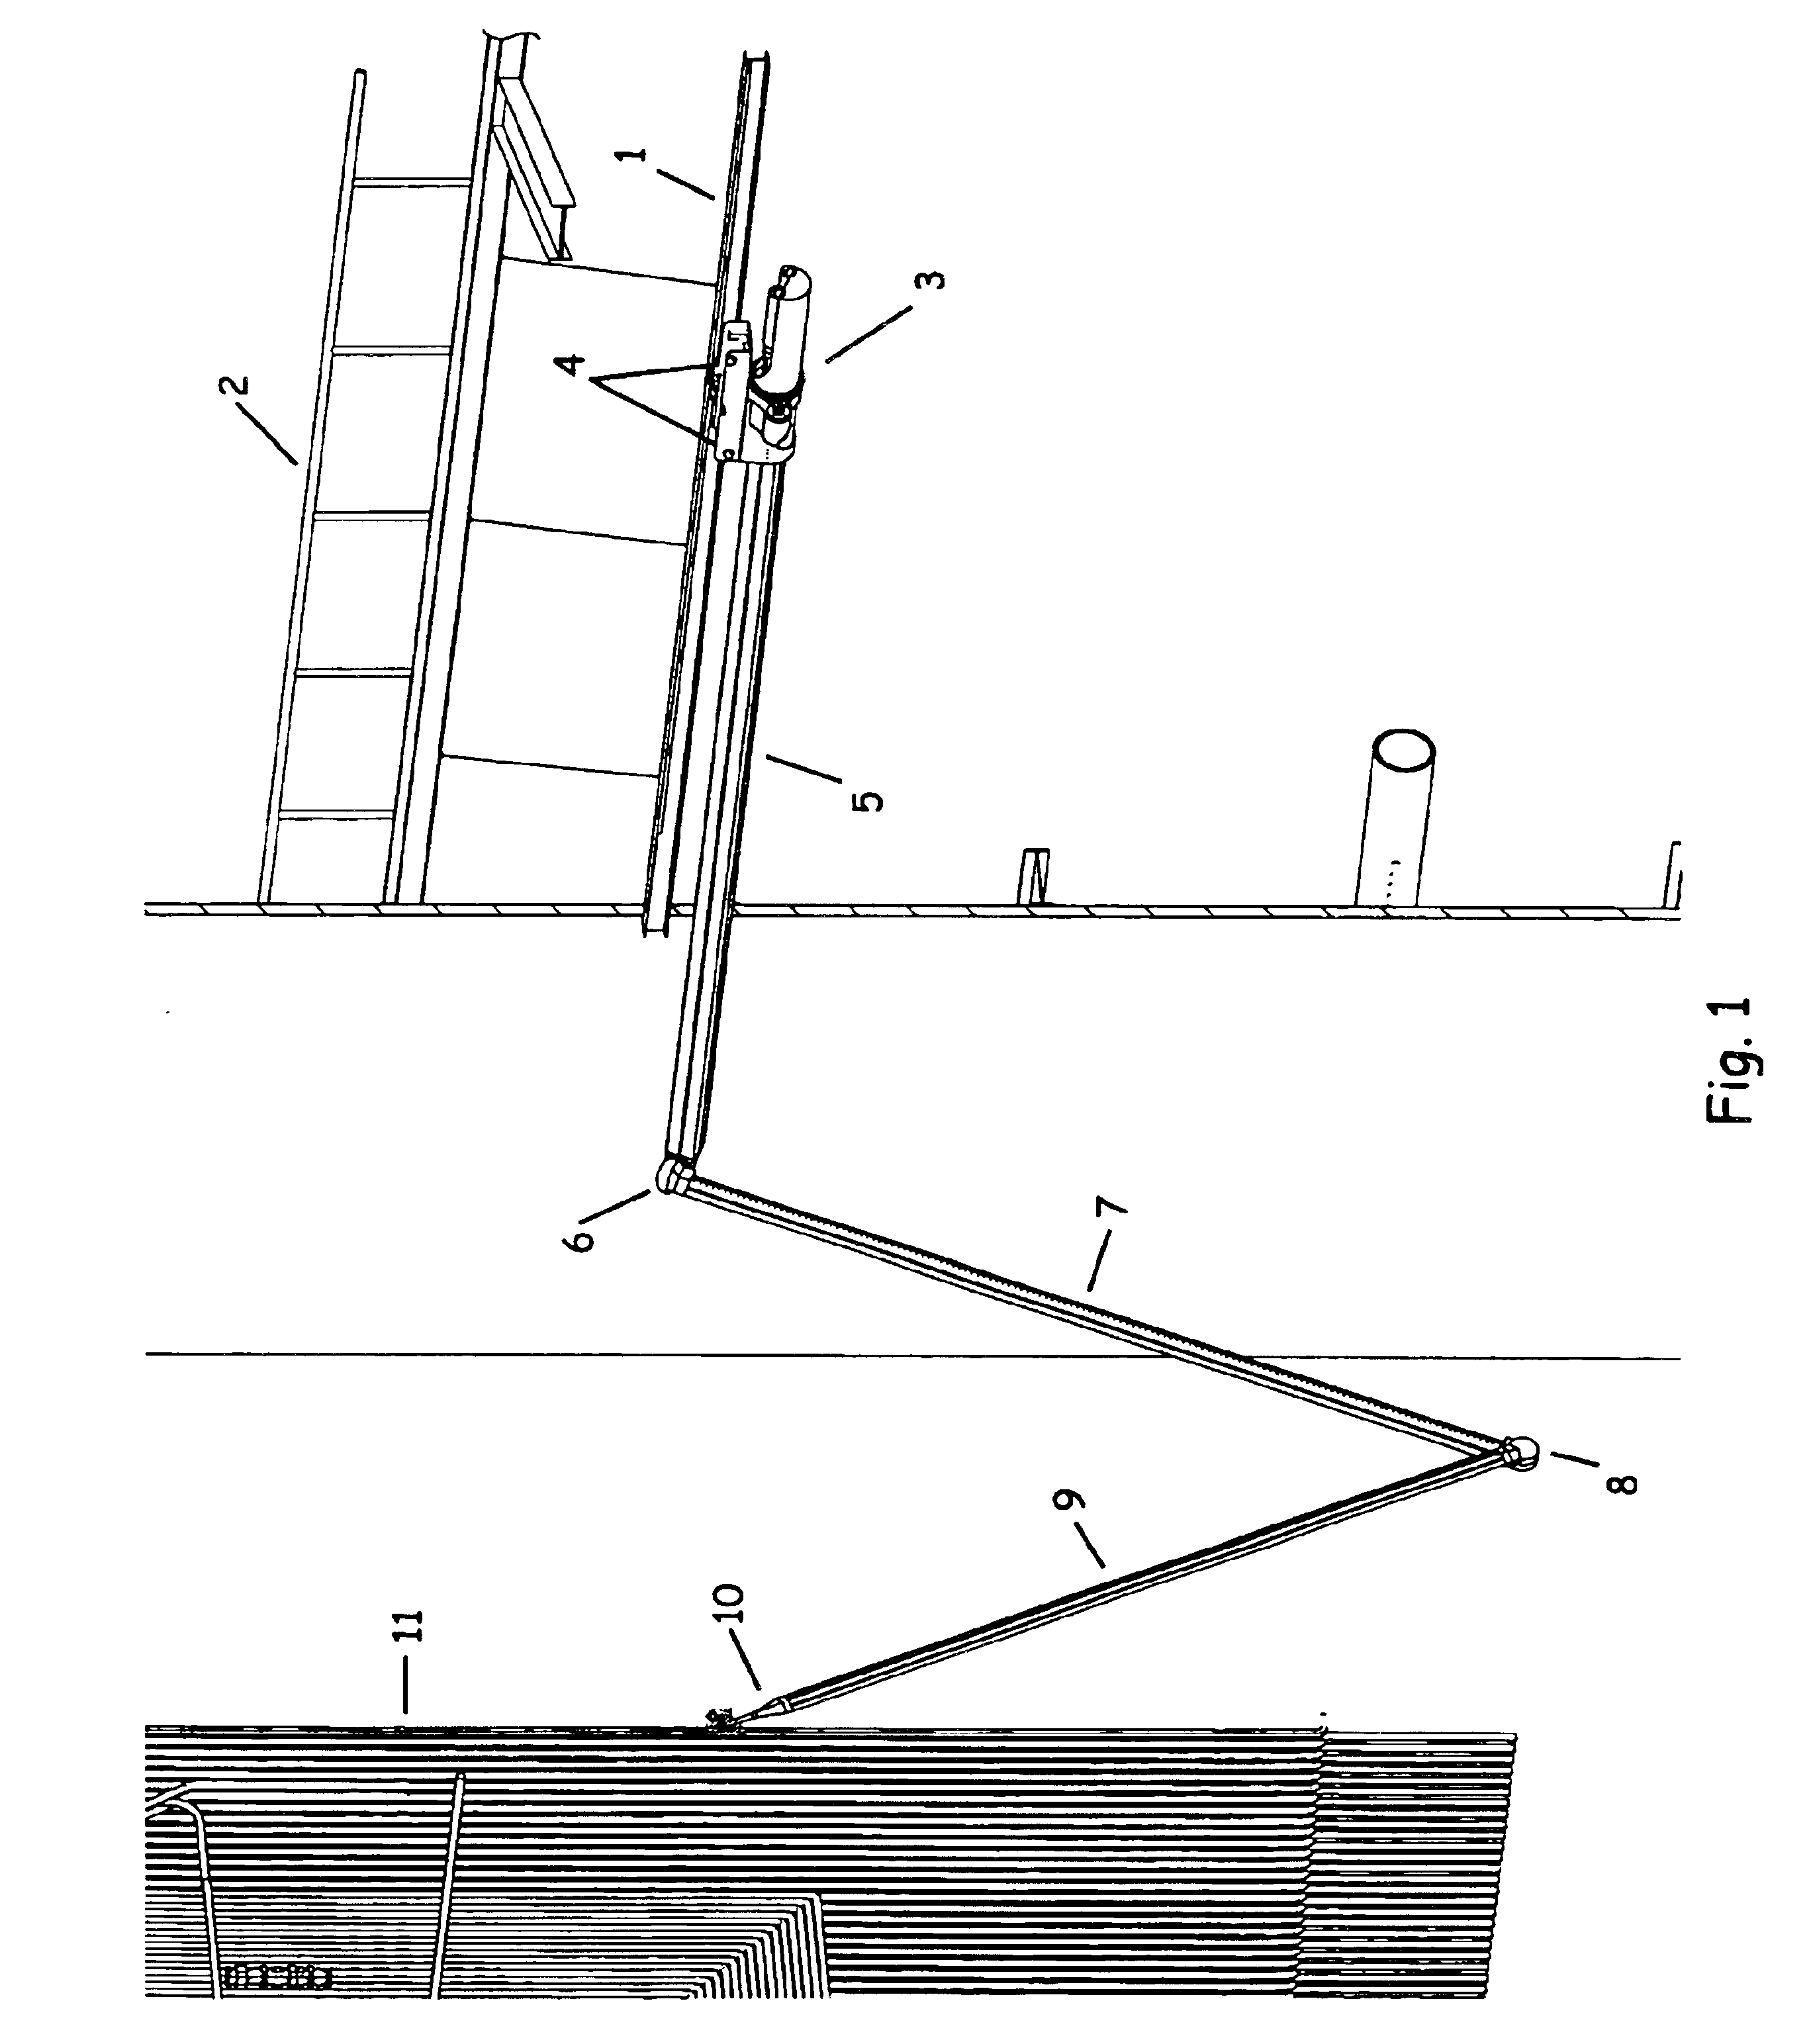 Method and apparatuses to remove slag